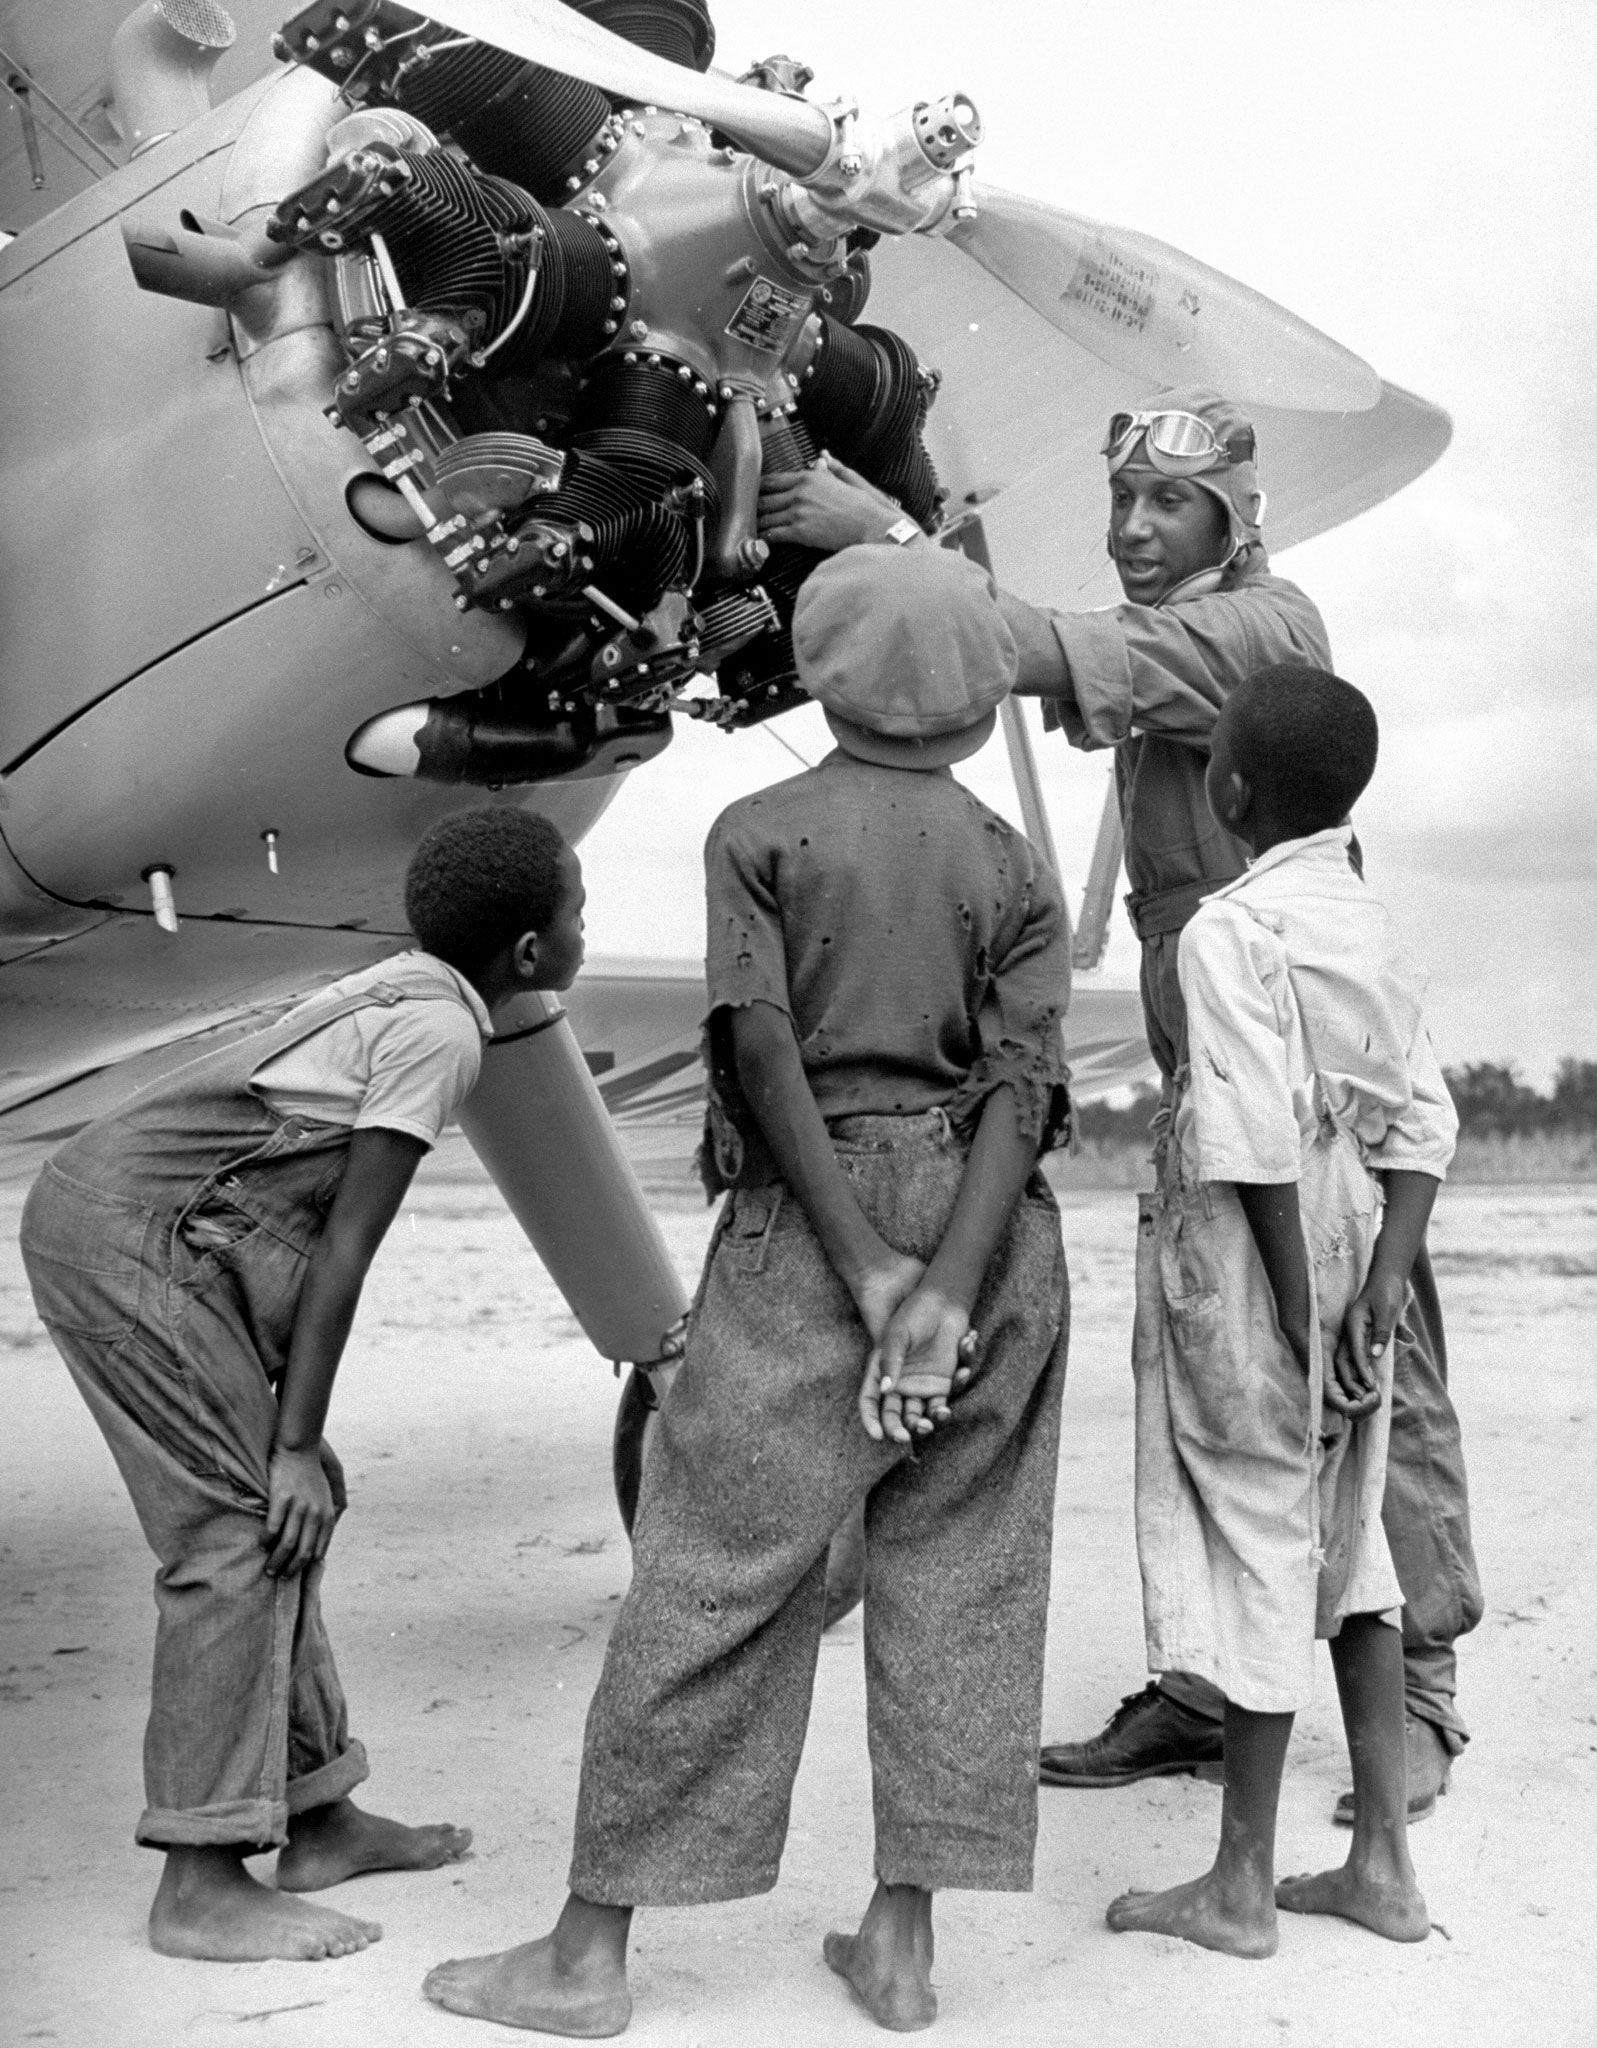 Cadet Custis, in training for US Army Air Corps 99th Pursuit Squadron, showing sharecropper's children aircraft engine on runway of flight school airfield, 1942.